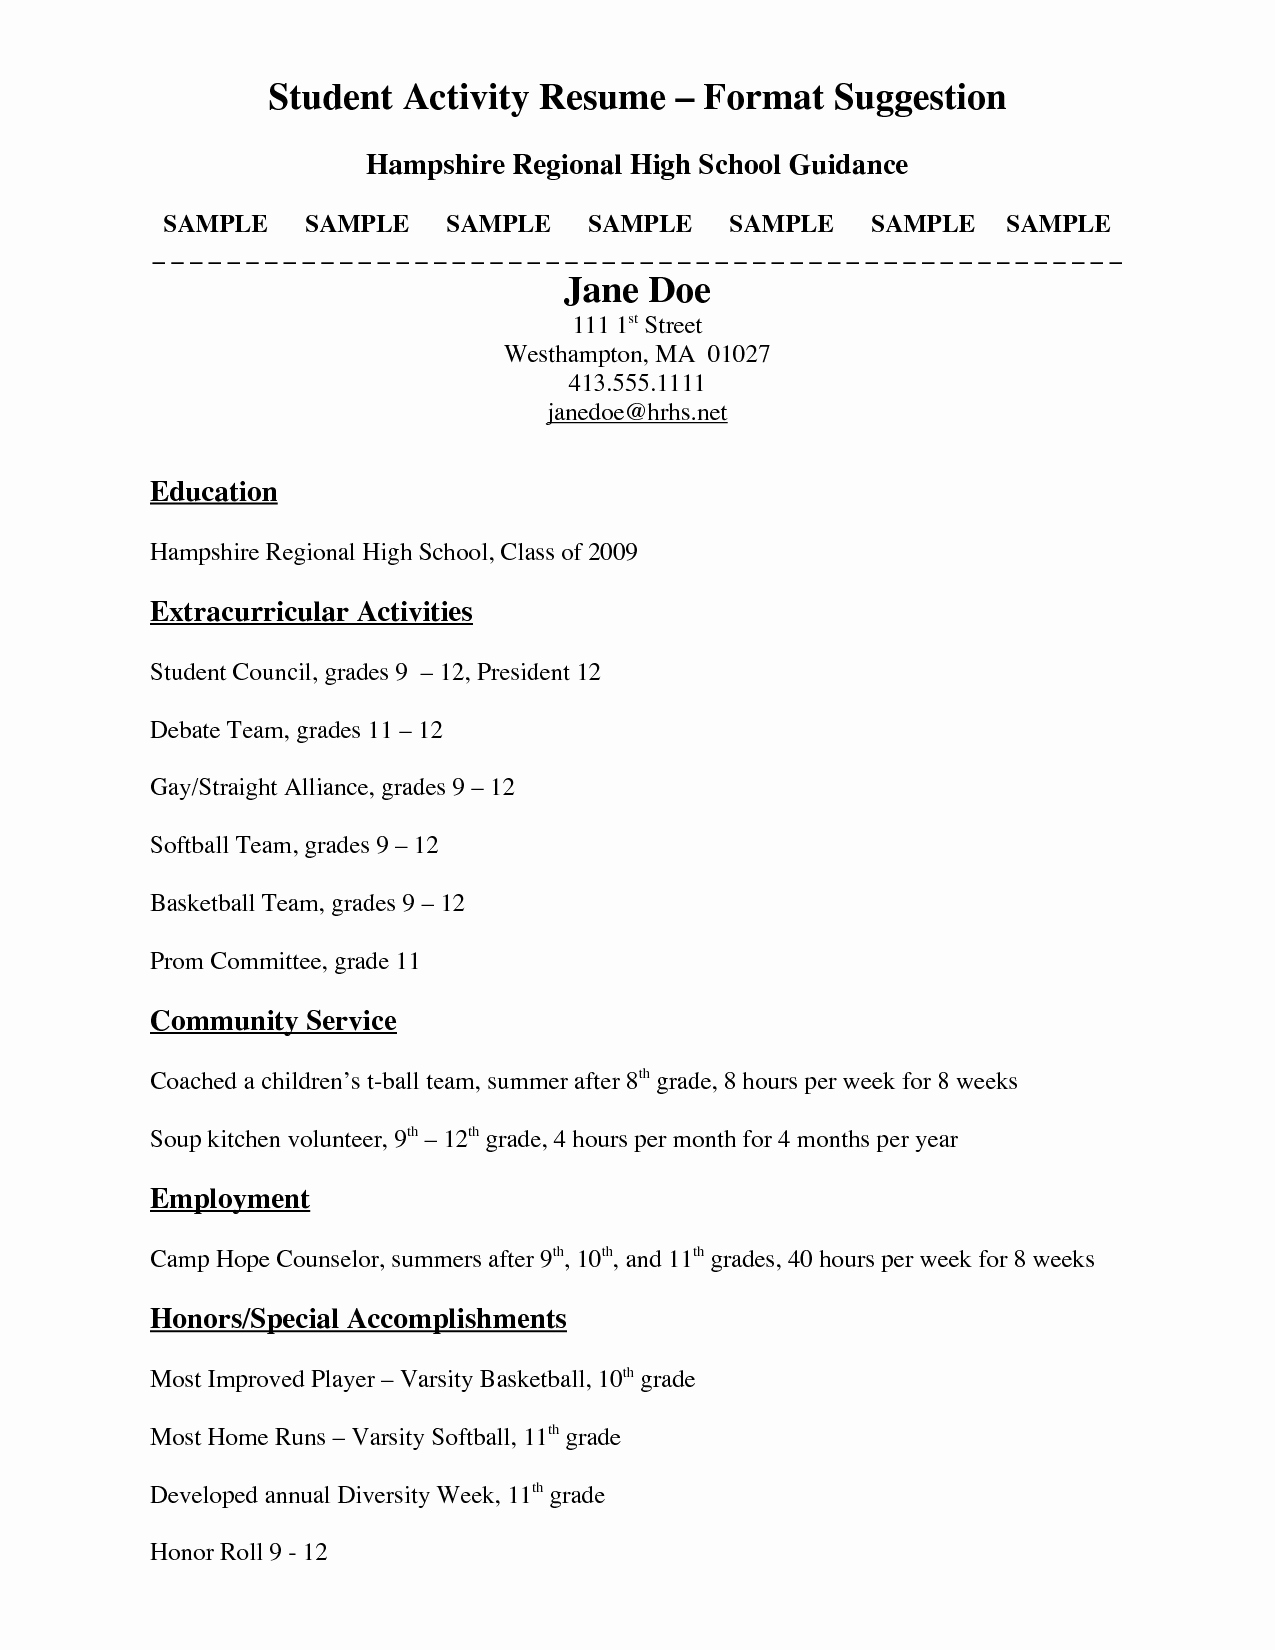 Sample High School Student Resume for College